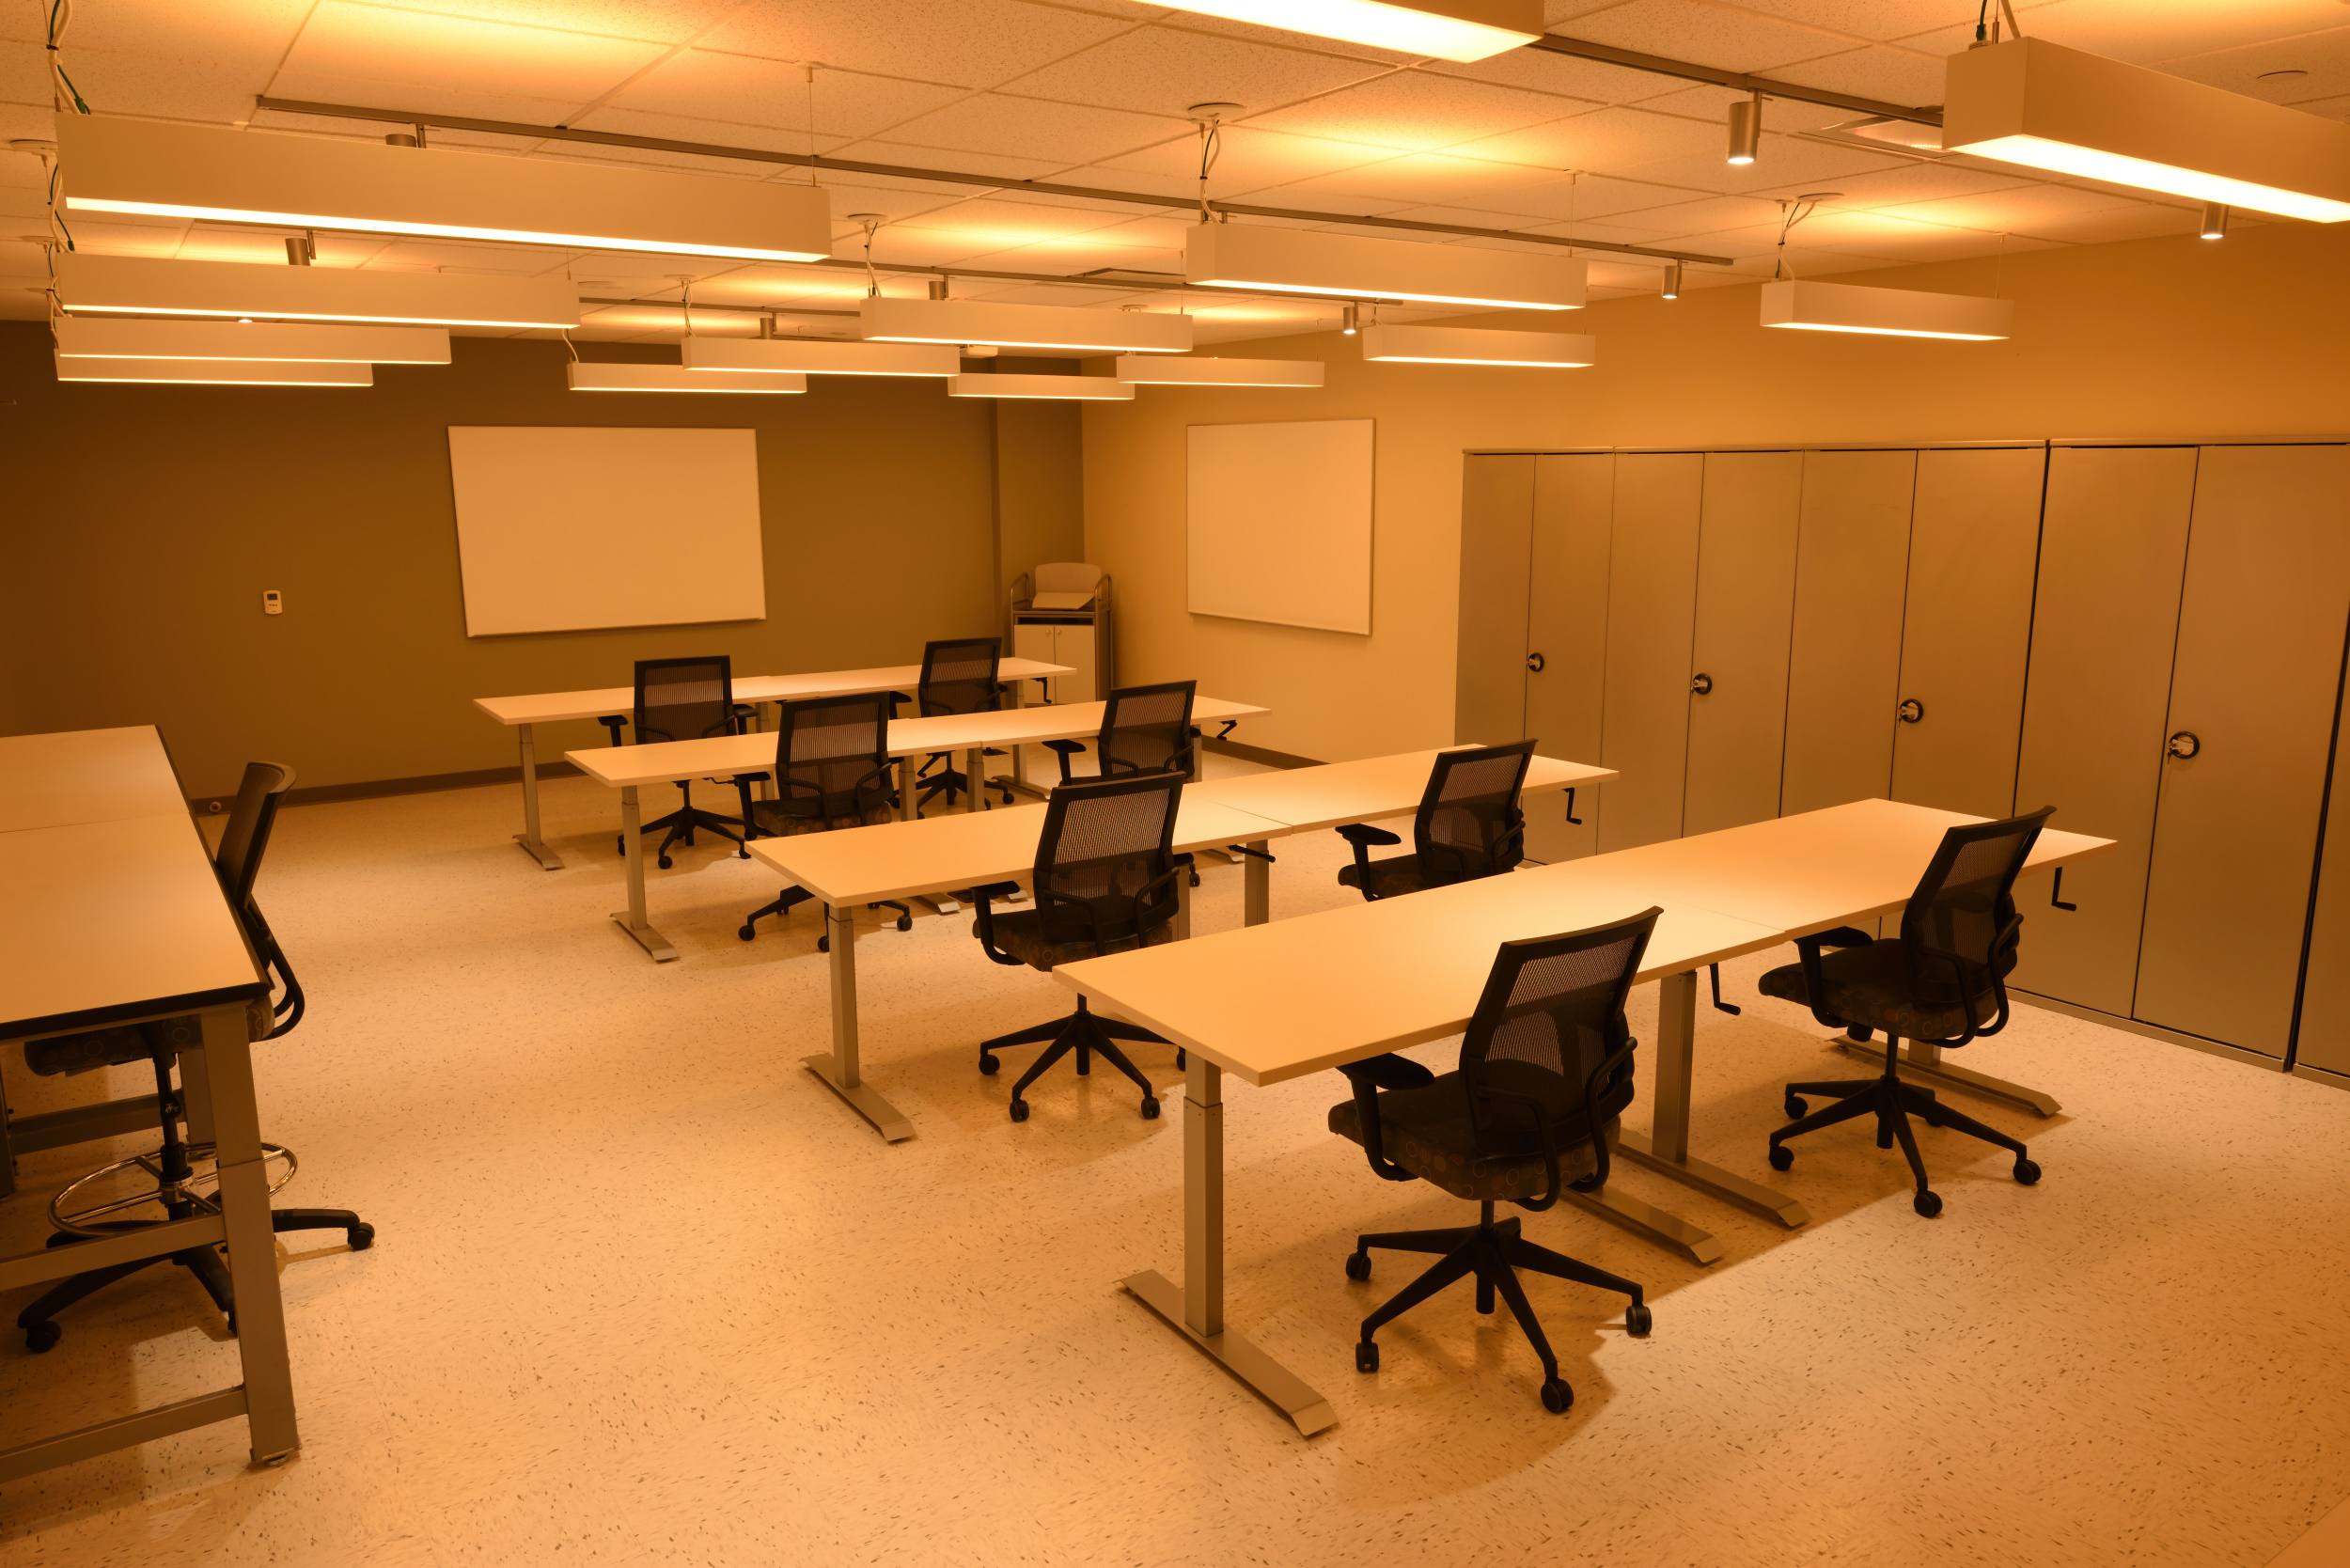 A classroom with warm lighting